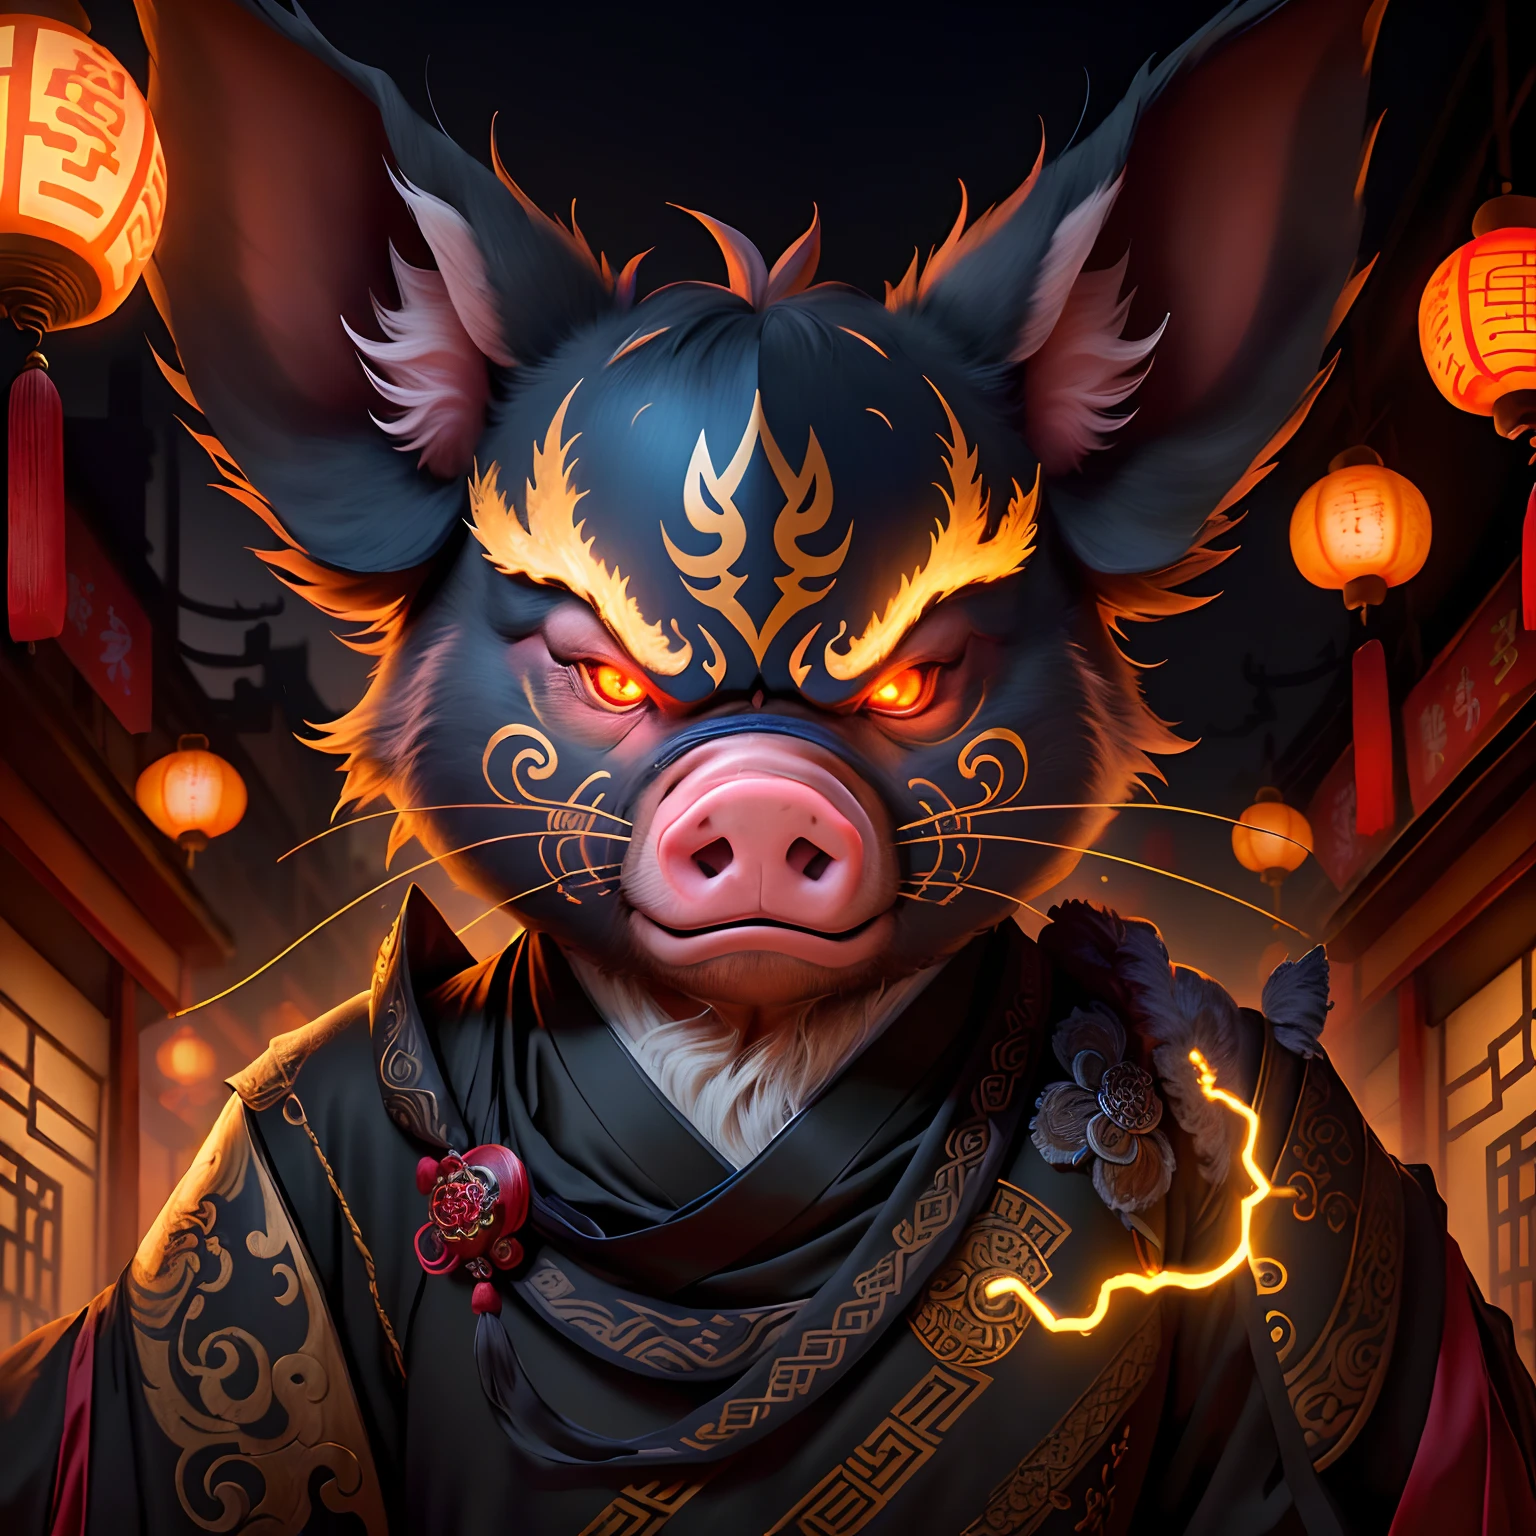 A pig, magical, anthropomorphic, boy, angry expression, glowing eyes, Prajna mask, Hanfu, background ancient Chinese street, night. Genshin Impact Impact, best picture quality, high detail, high quality, ultra high resolution, oc rendering, 8K